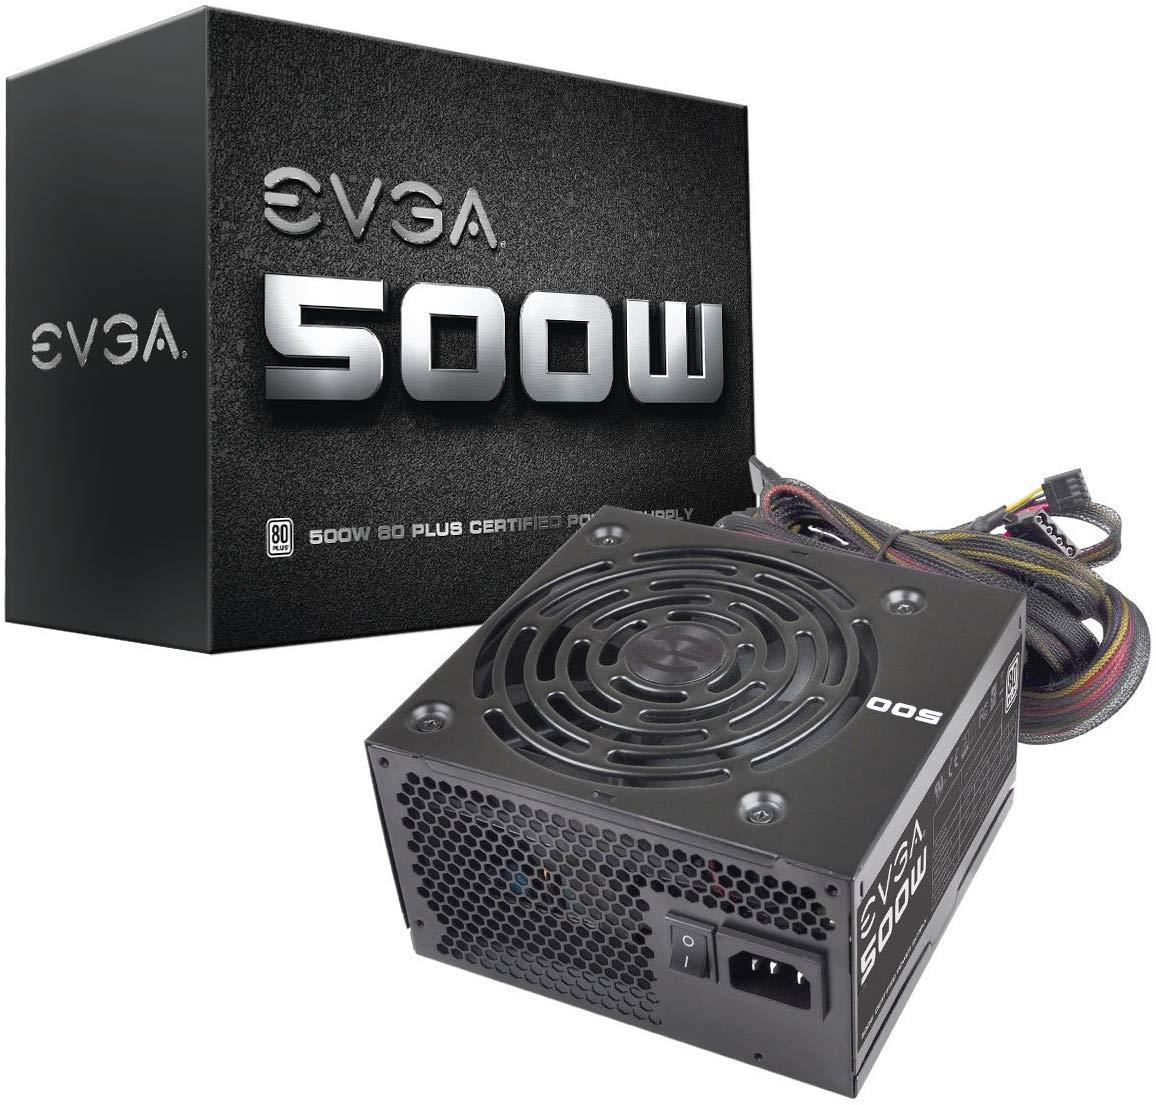 EVGA 500 W1 - one of the best Power Supplies for Gaming